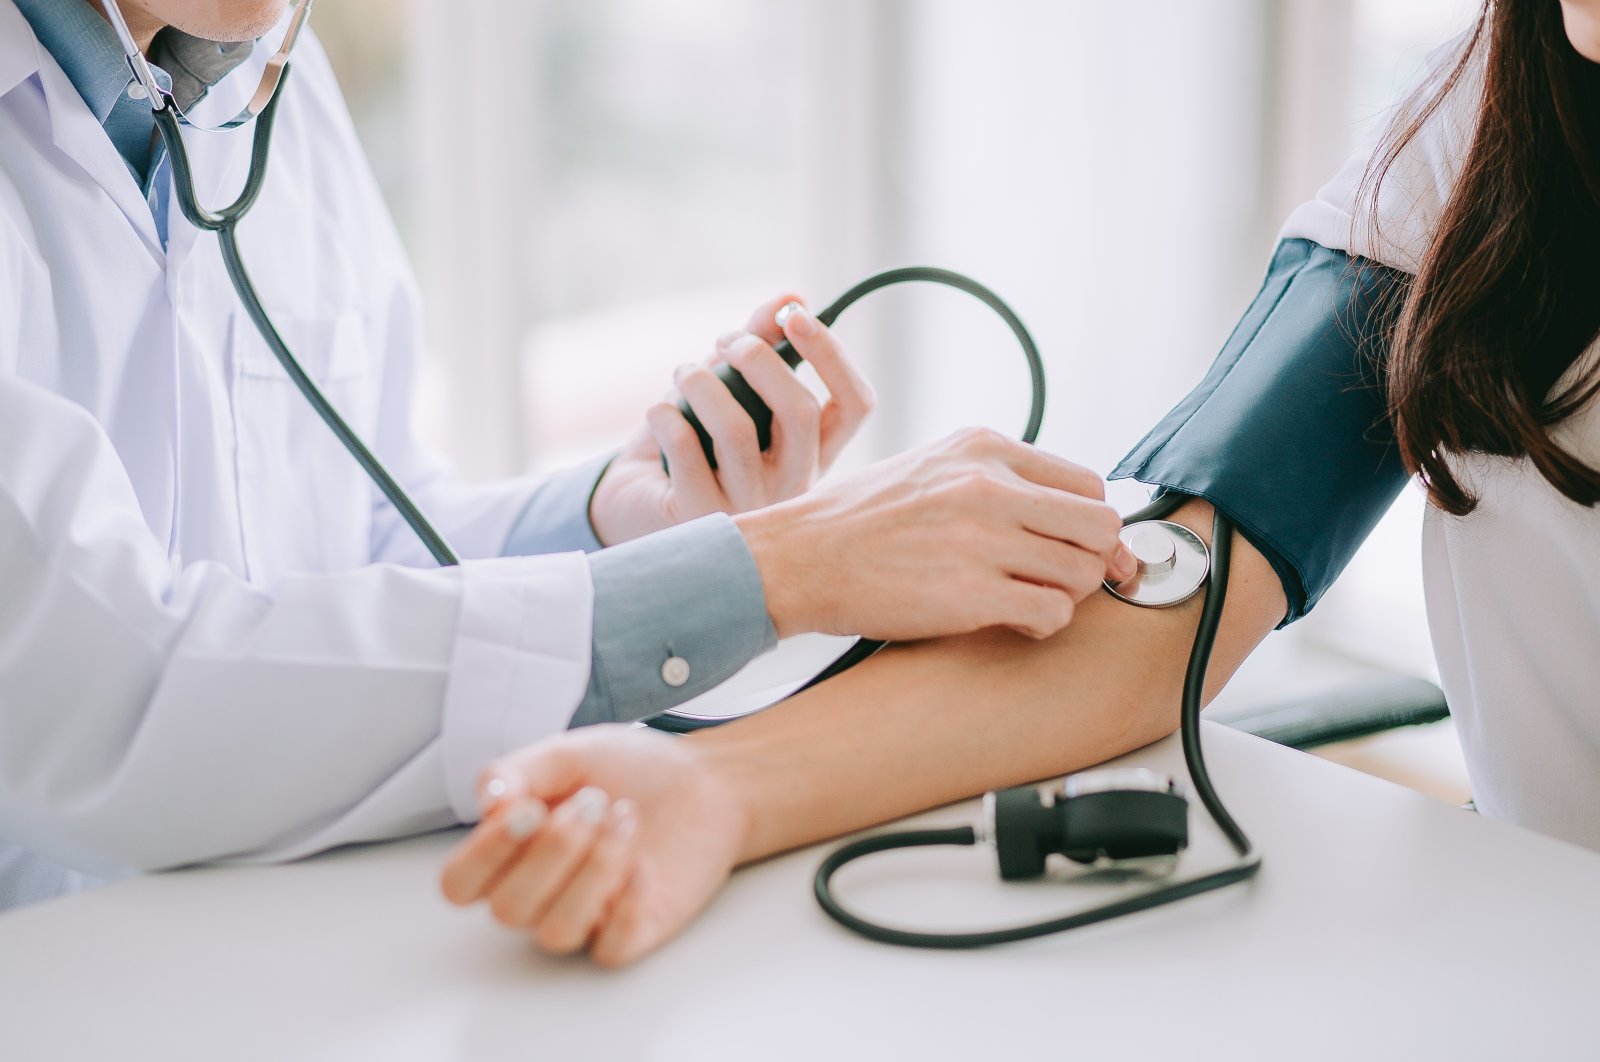 Hypertension is the second leading cause of end-stage renal failure globally and in Türkiye, after diabetes. (Shutterstock Photo)